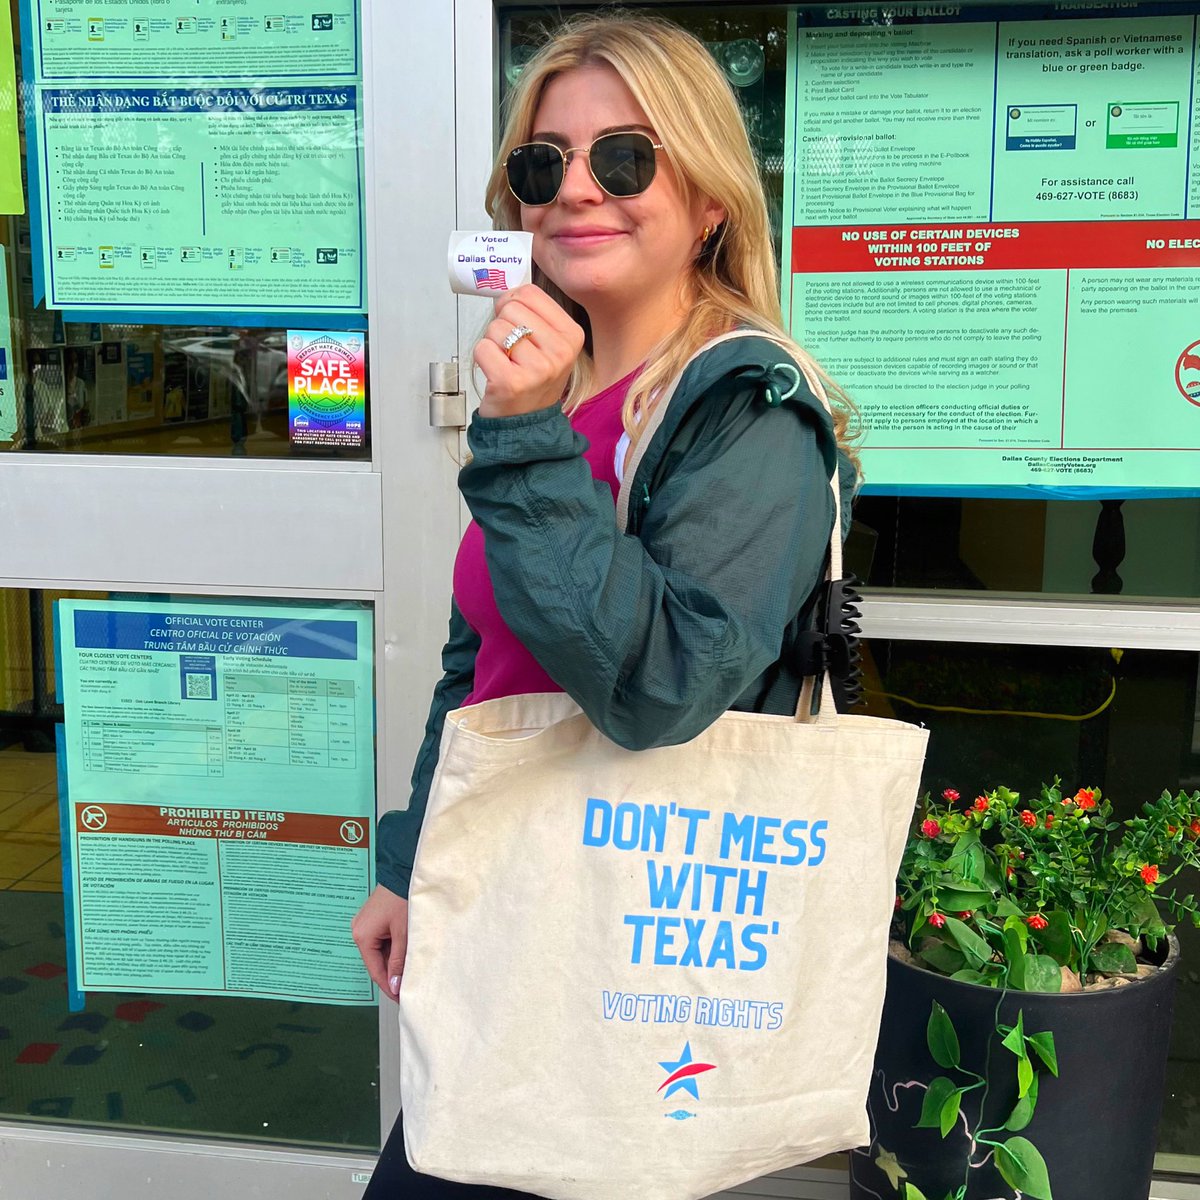 Get ready to vote tomorrow in style! 🤩 This canvas tote bag is perfect for carrying all your voting items like: ☑️ your government issued ID ☑️ your printed voter guide ☑️ your voter identification card ☑️ water & more! remember to call 866-OUR-VOTE if you have any questions 📞